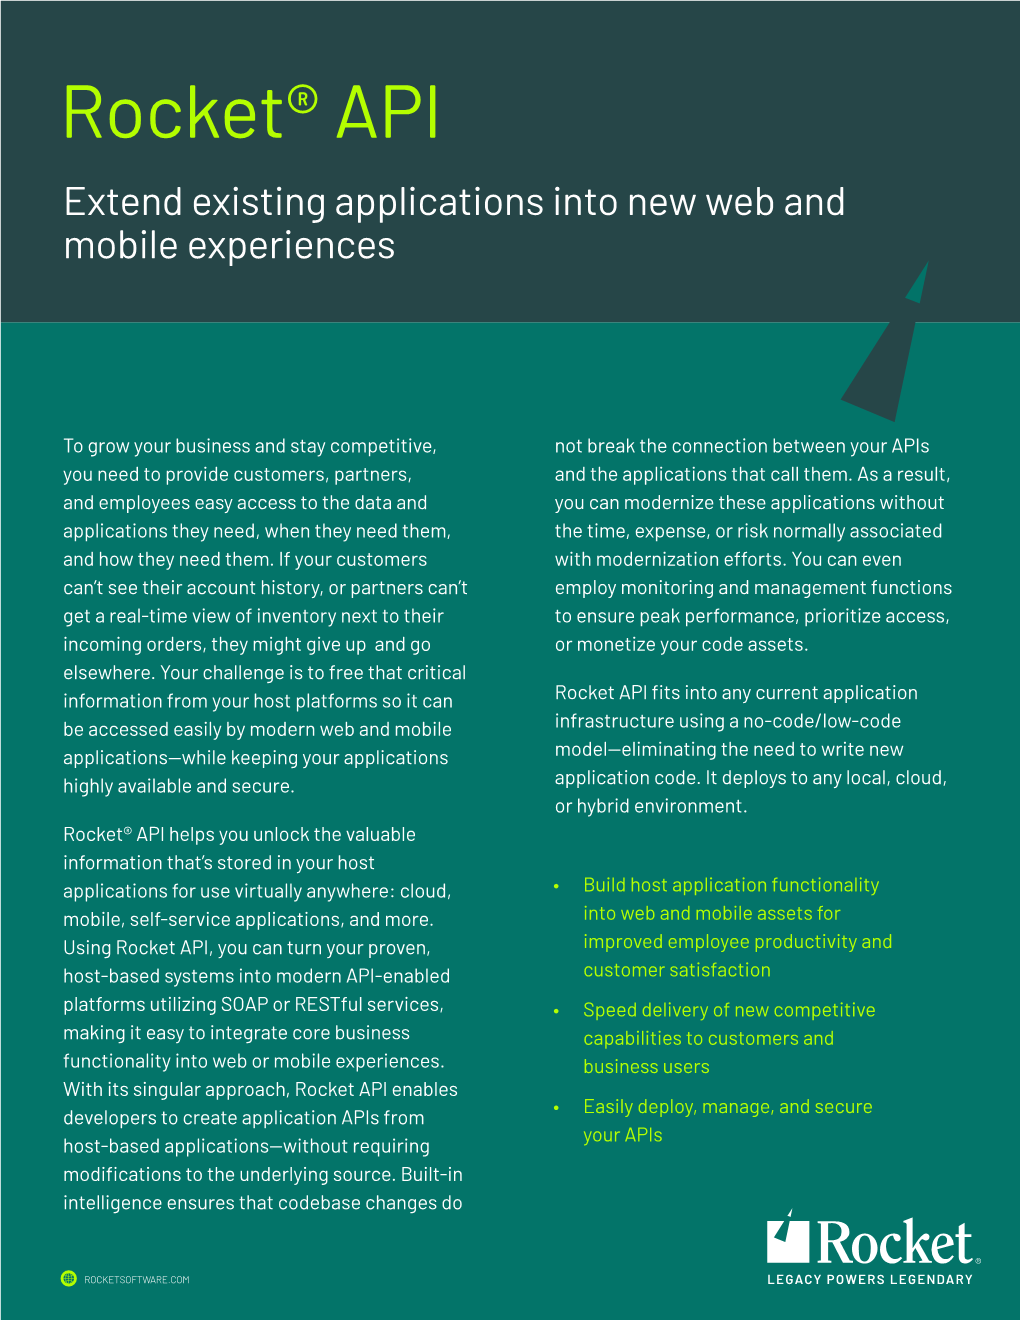 Rocket® API Extend Existing Applications Into New Web and Mobile Experiences